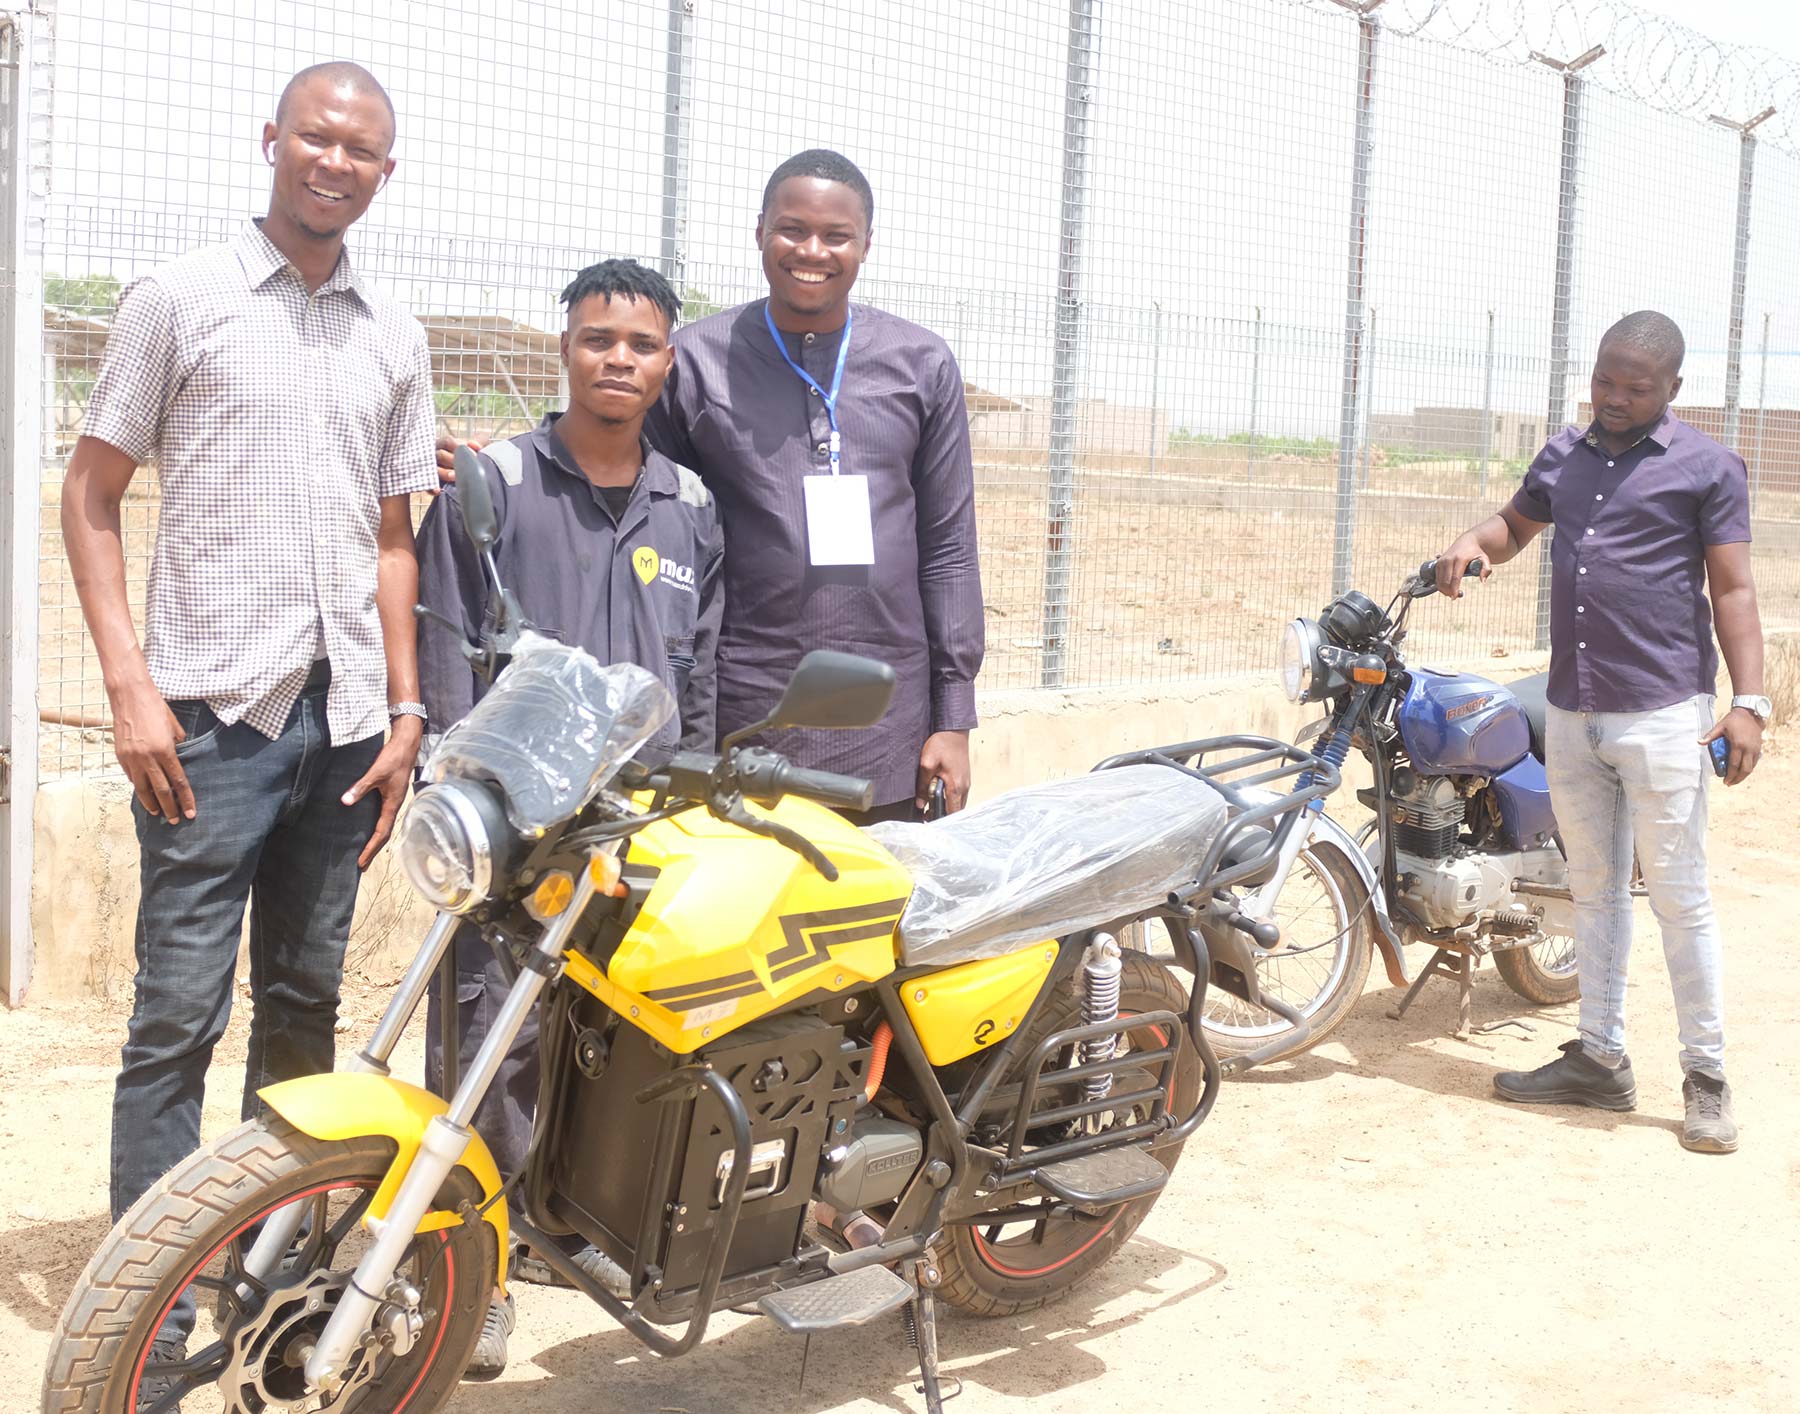 Deji Ojo, Associate with the Africa Energy Program with One Acre Fund and Baban Gona at a training workshop testing electric bikes for farm logistics